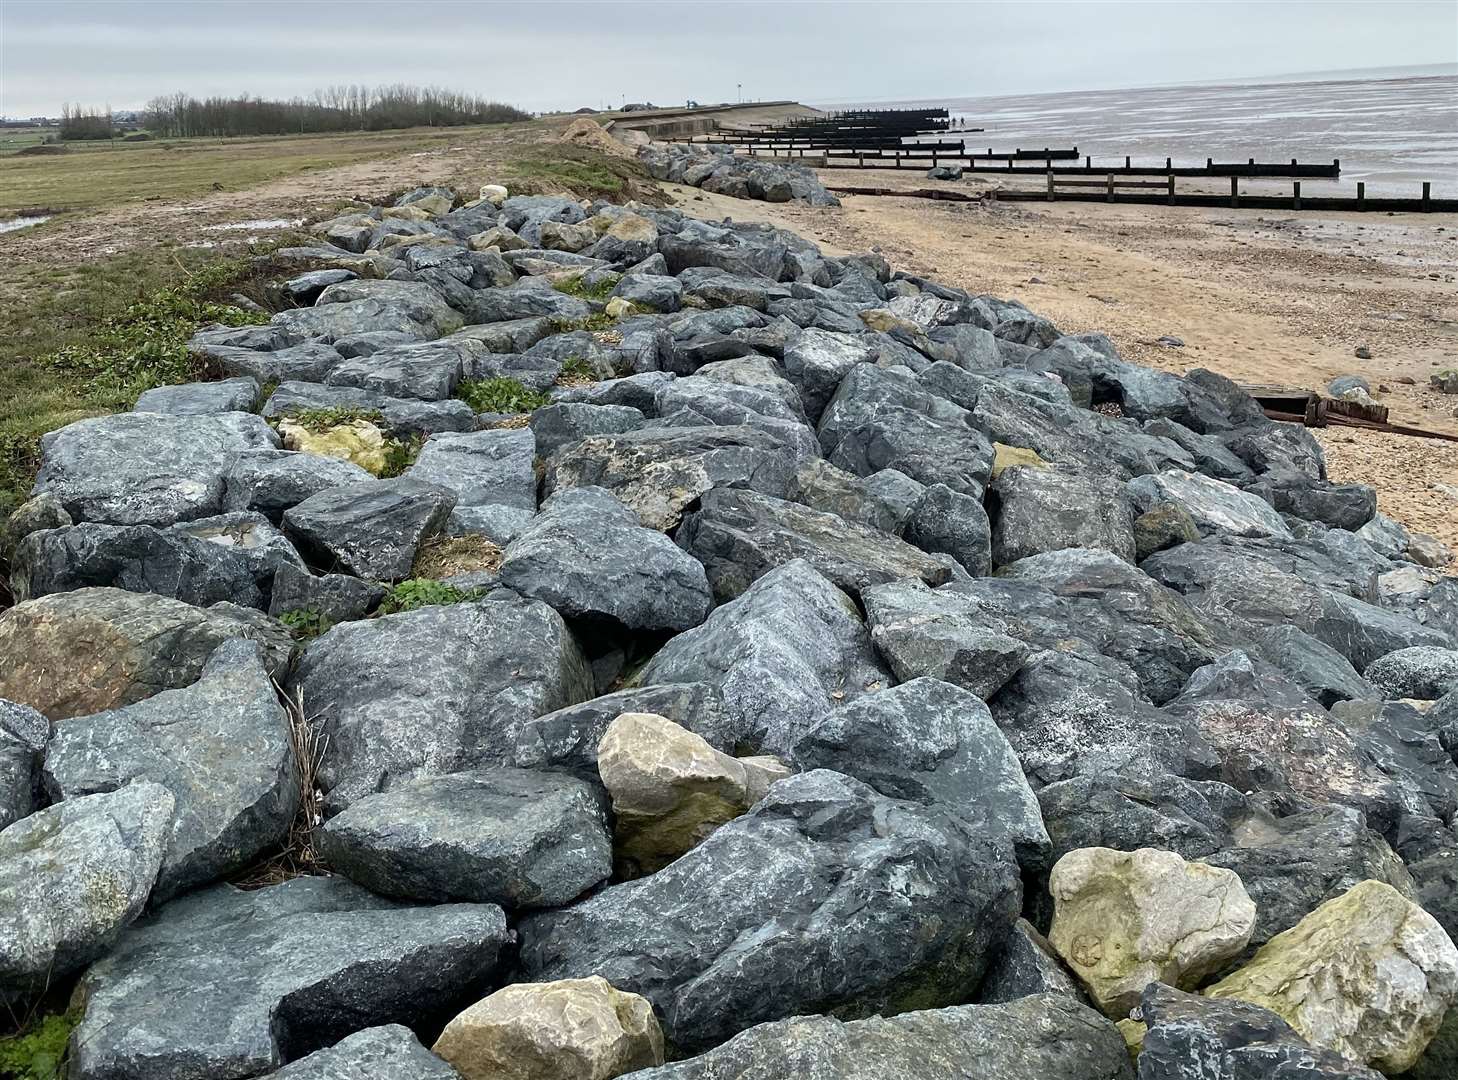 Sea defence works are being carried out along the coast, in Shellness near Leysdown